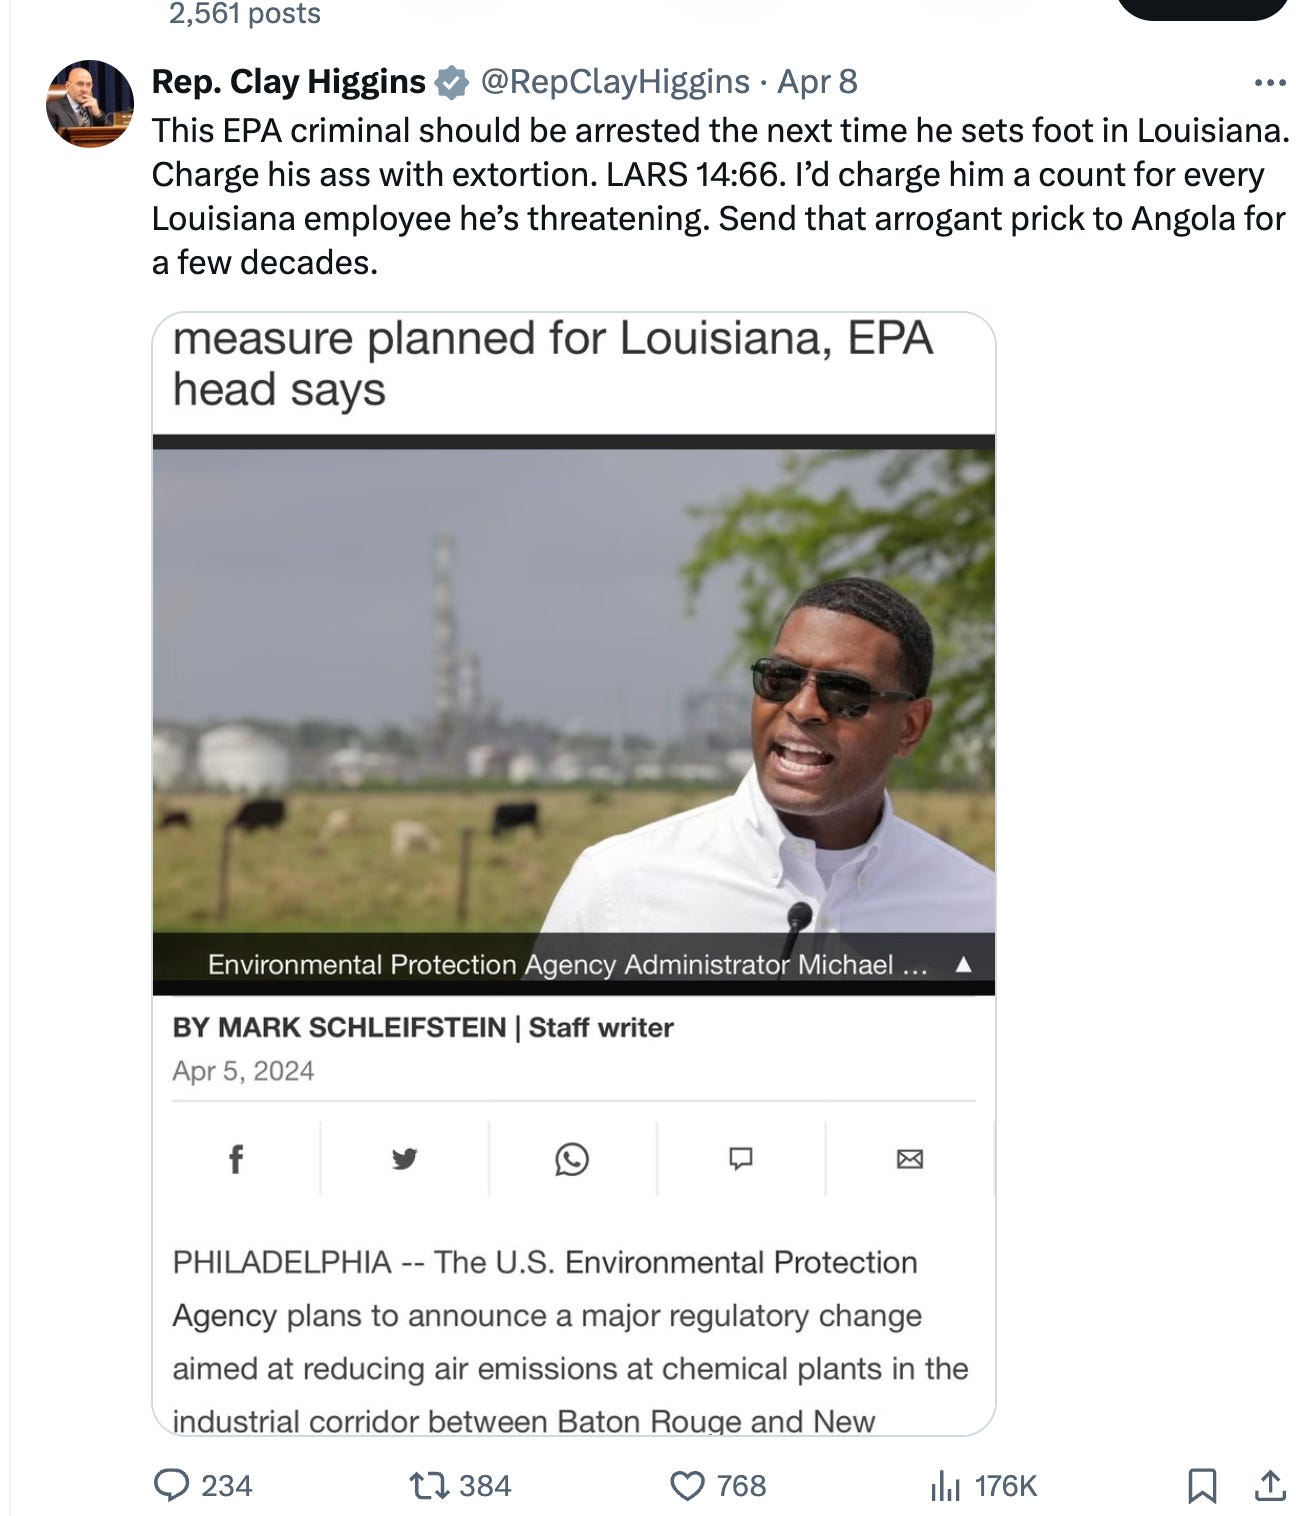 Clay Higgins tweet: This EPA criminal should be arrested the next time he sets foot in Louisiana. Charge his ass with extortion. LARS 14:66. I’d charge him a count for every Louisiana employee he’s threatening. Send that arrogant prick to Angola for a few decades." With pic showing EPA administrator is a (handsome) Black man. 